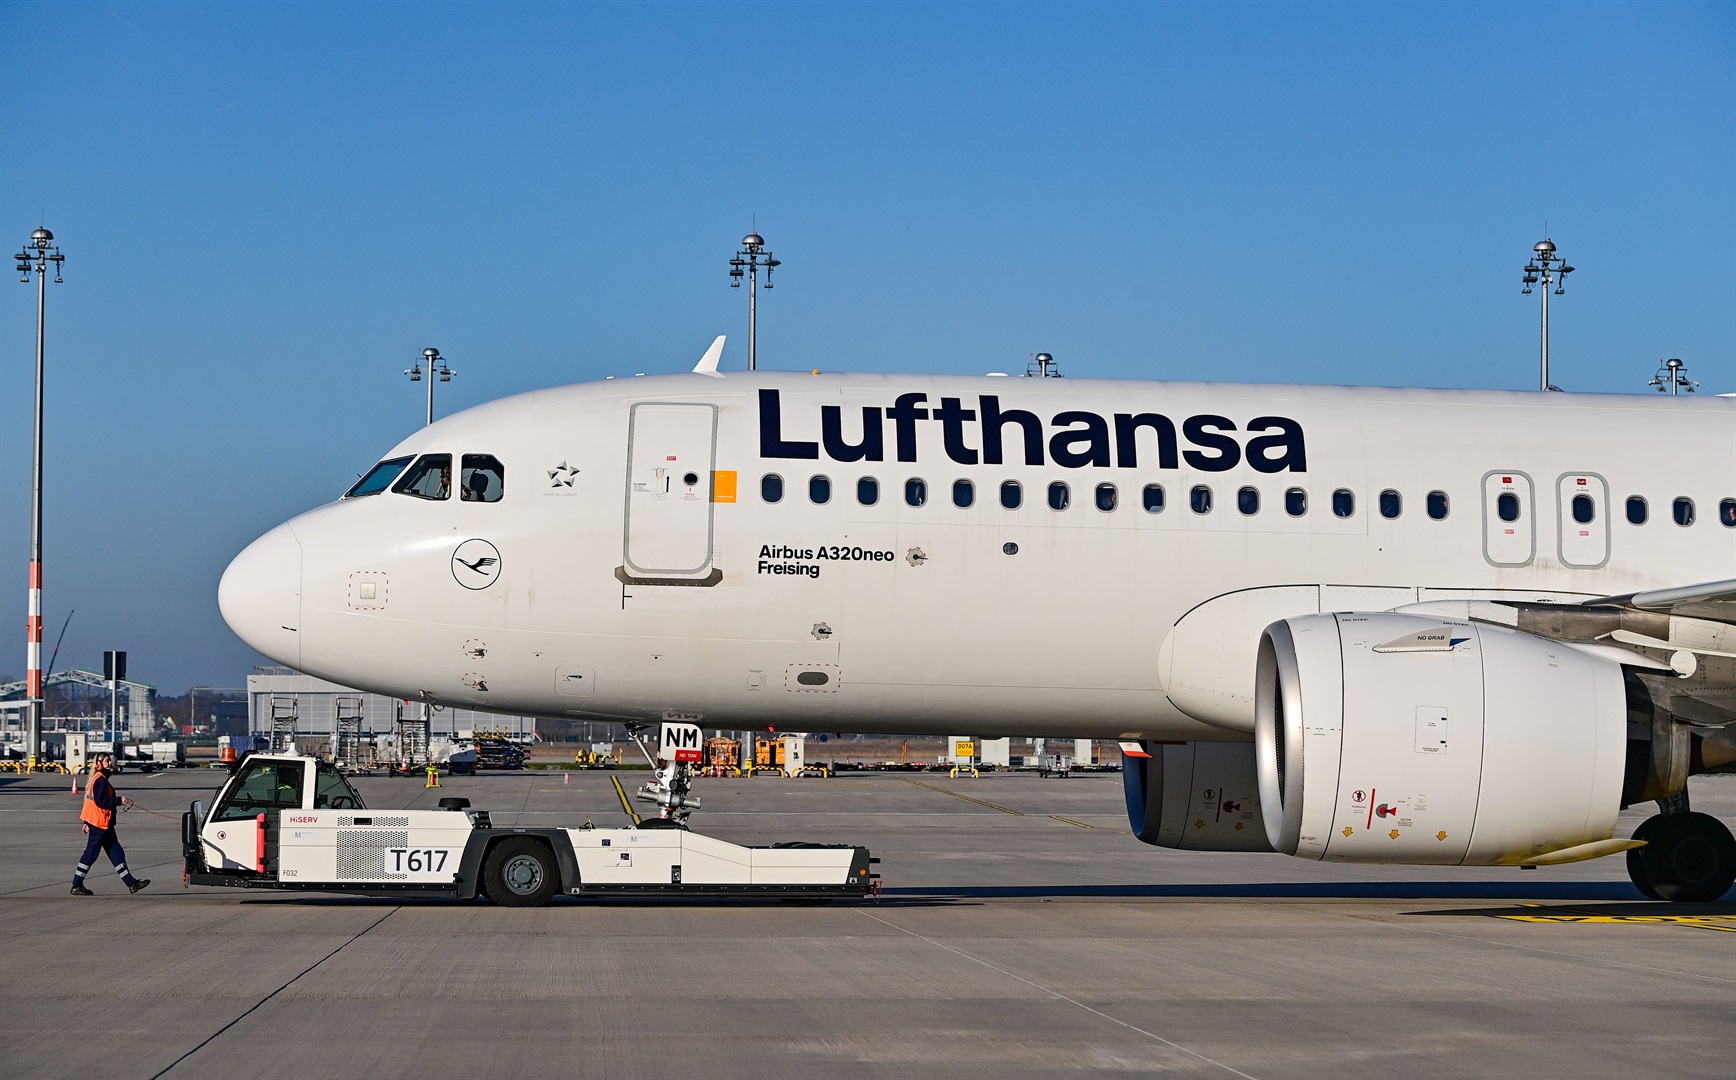 Lufthansa's workforce has fallen by nearly a quarter since the pandemic started. Getty Images